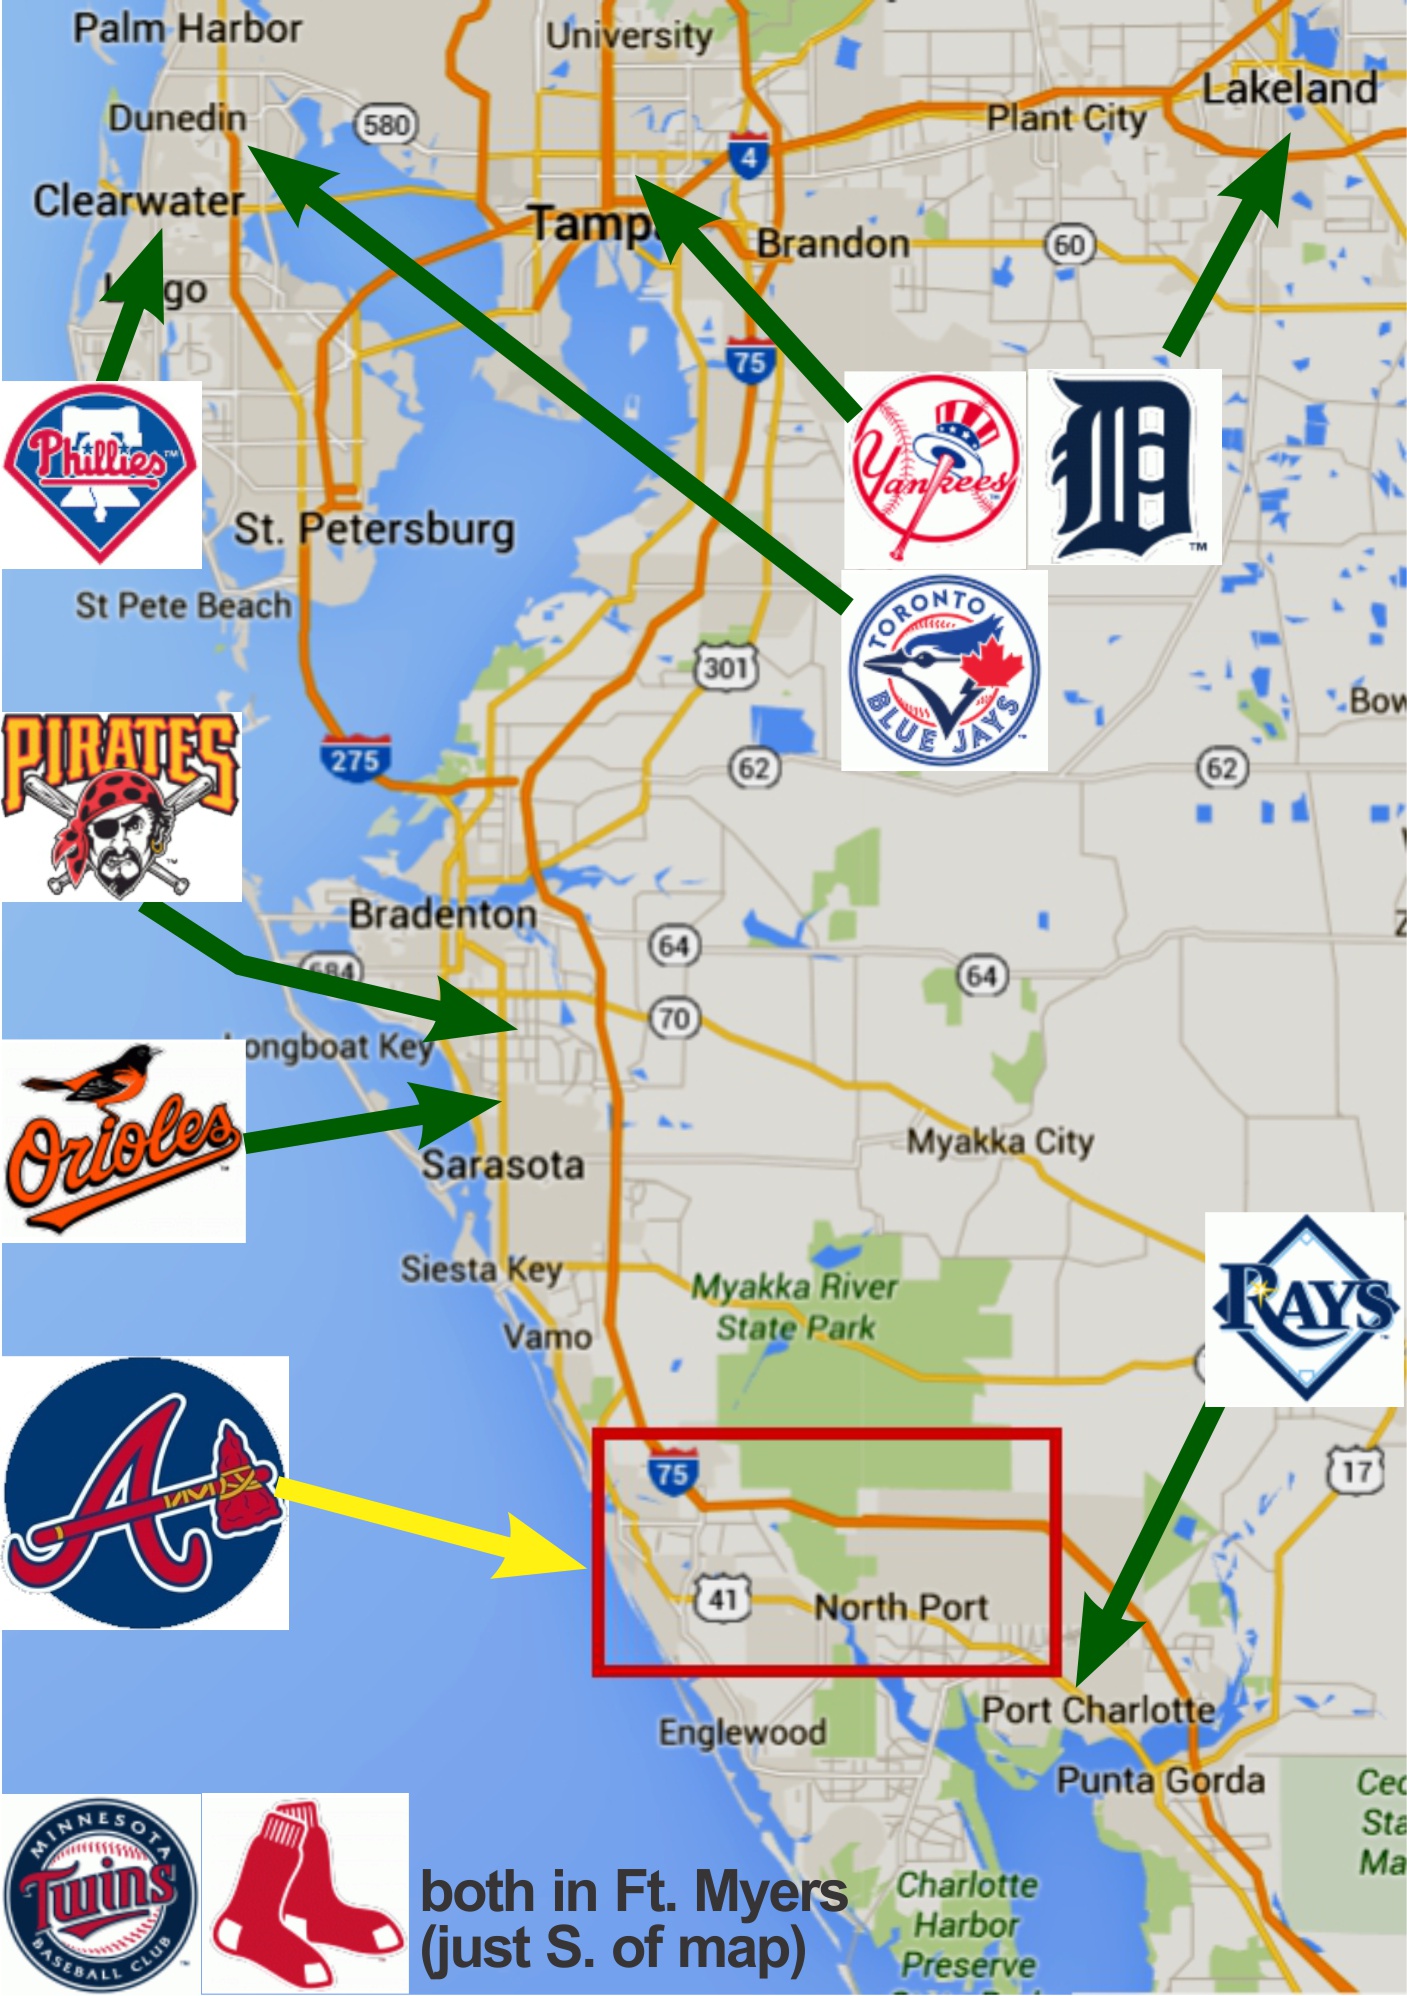 Braves Finally Look to Have An Invite to a New Spring Training Home